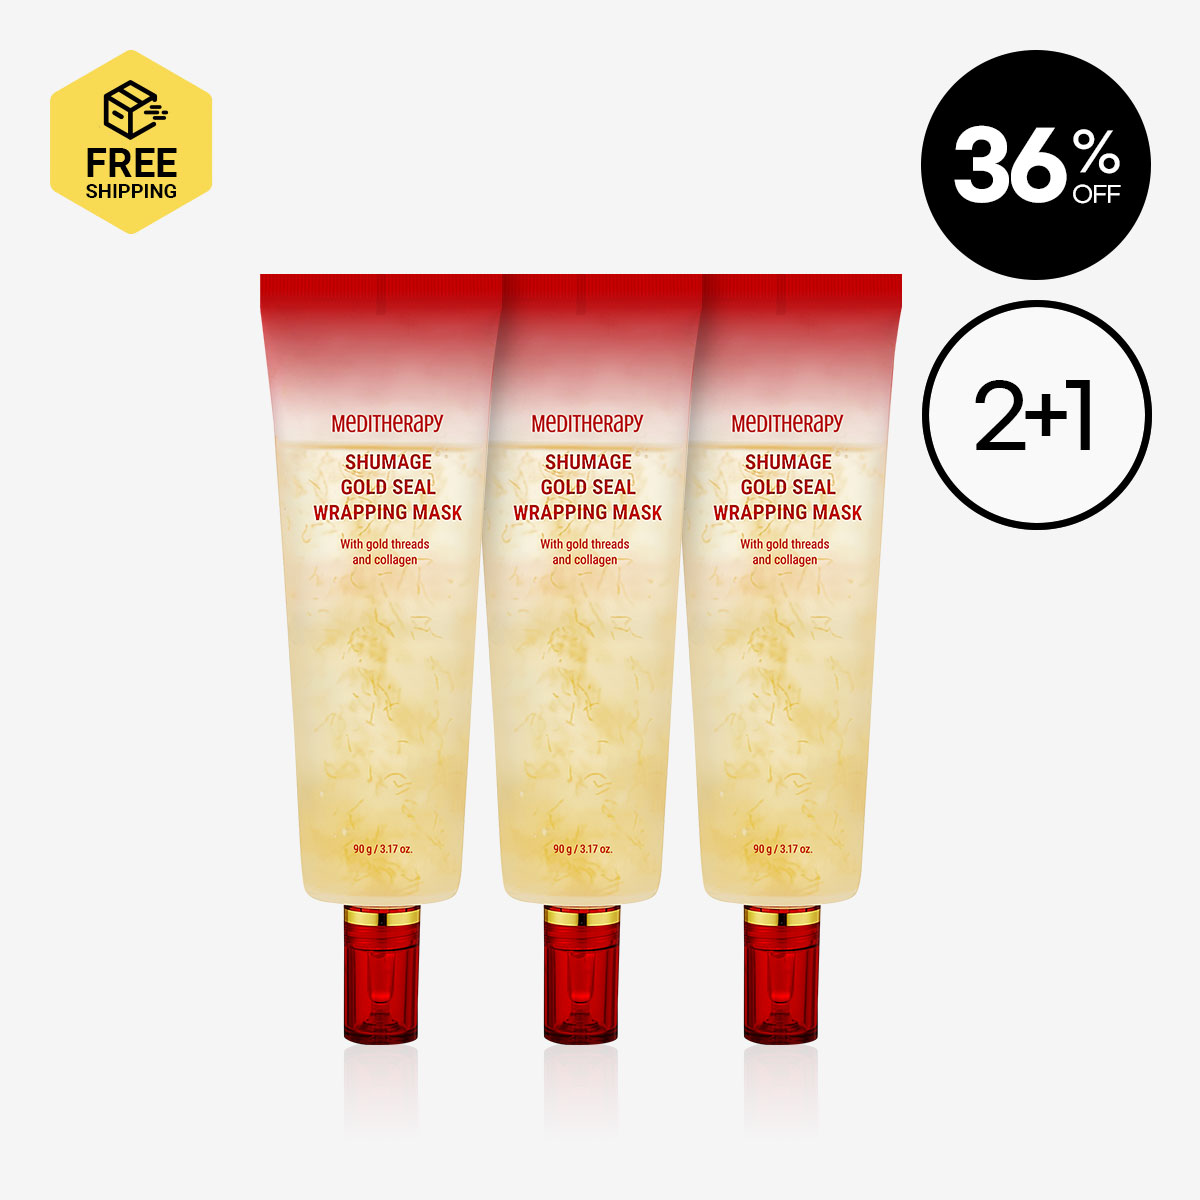 [MEDITHERAPY] Shumage Gold Seal Wrapping Mask 2+1